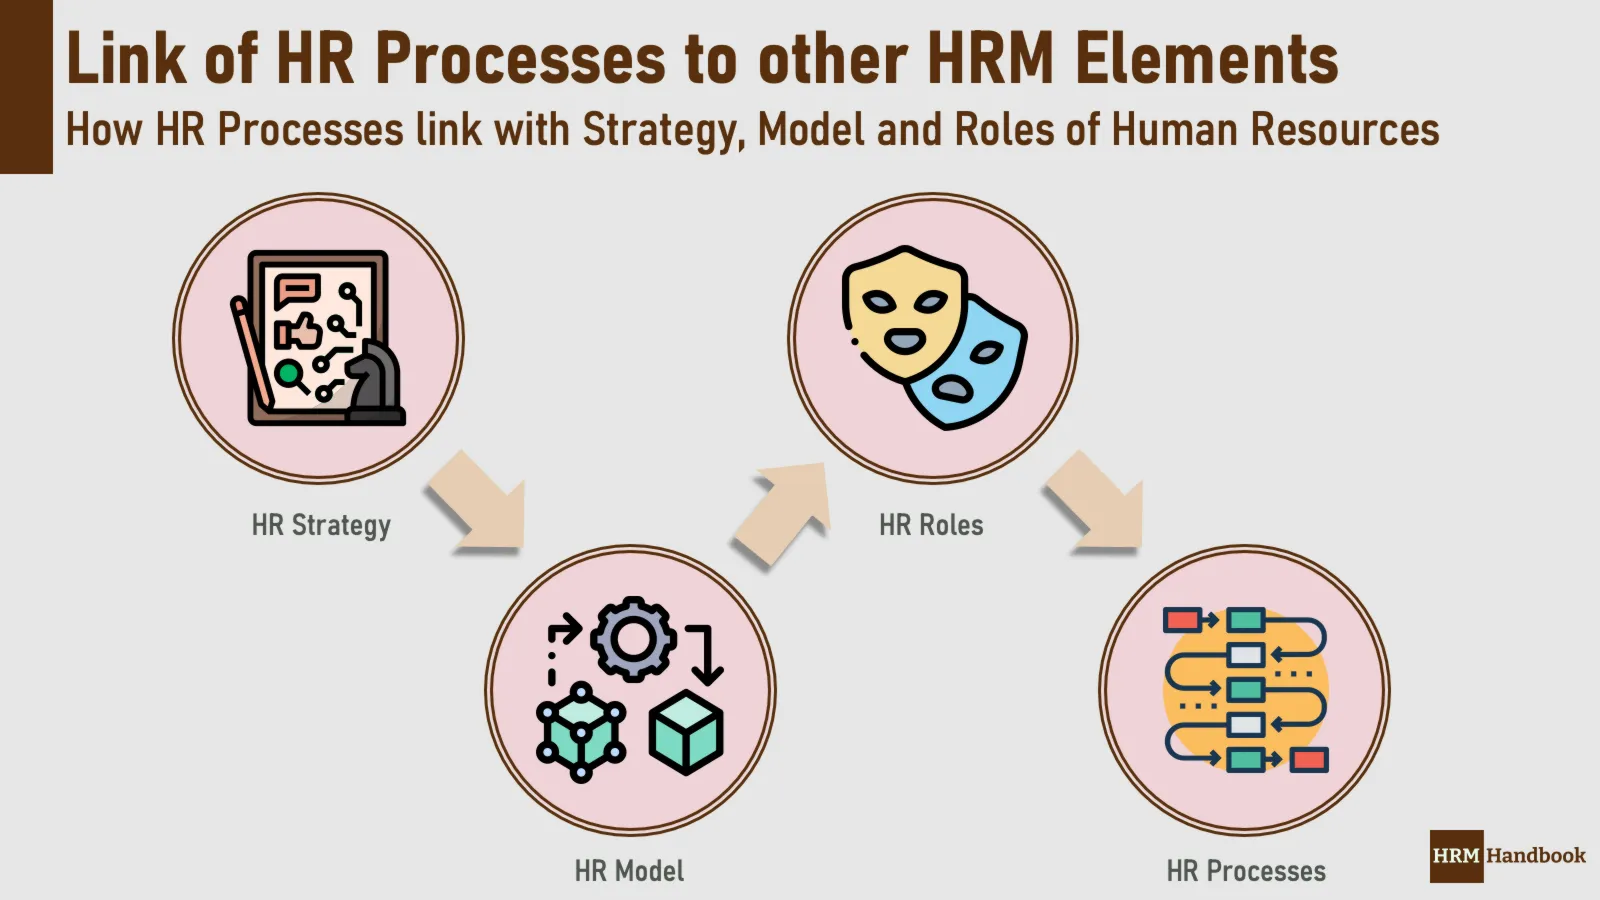 How HR Processes link to other HRM Elements like HR Strategy, HR Model and HR Roles and Responsibilities